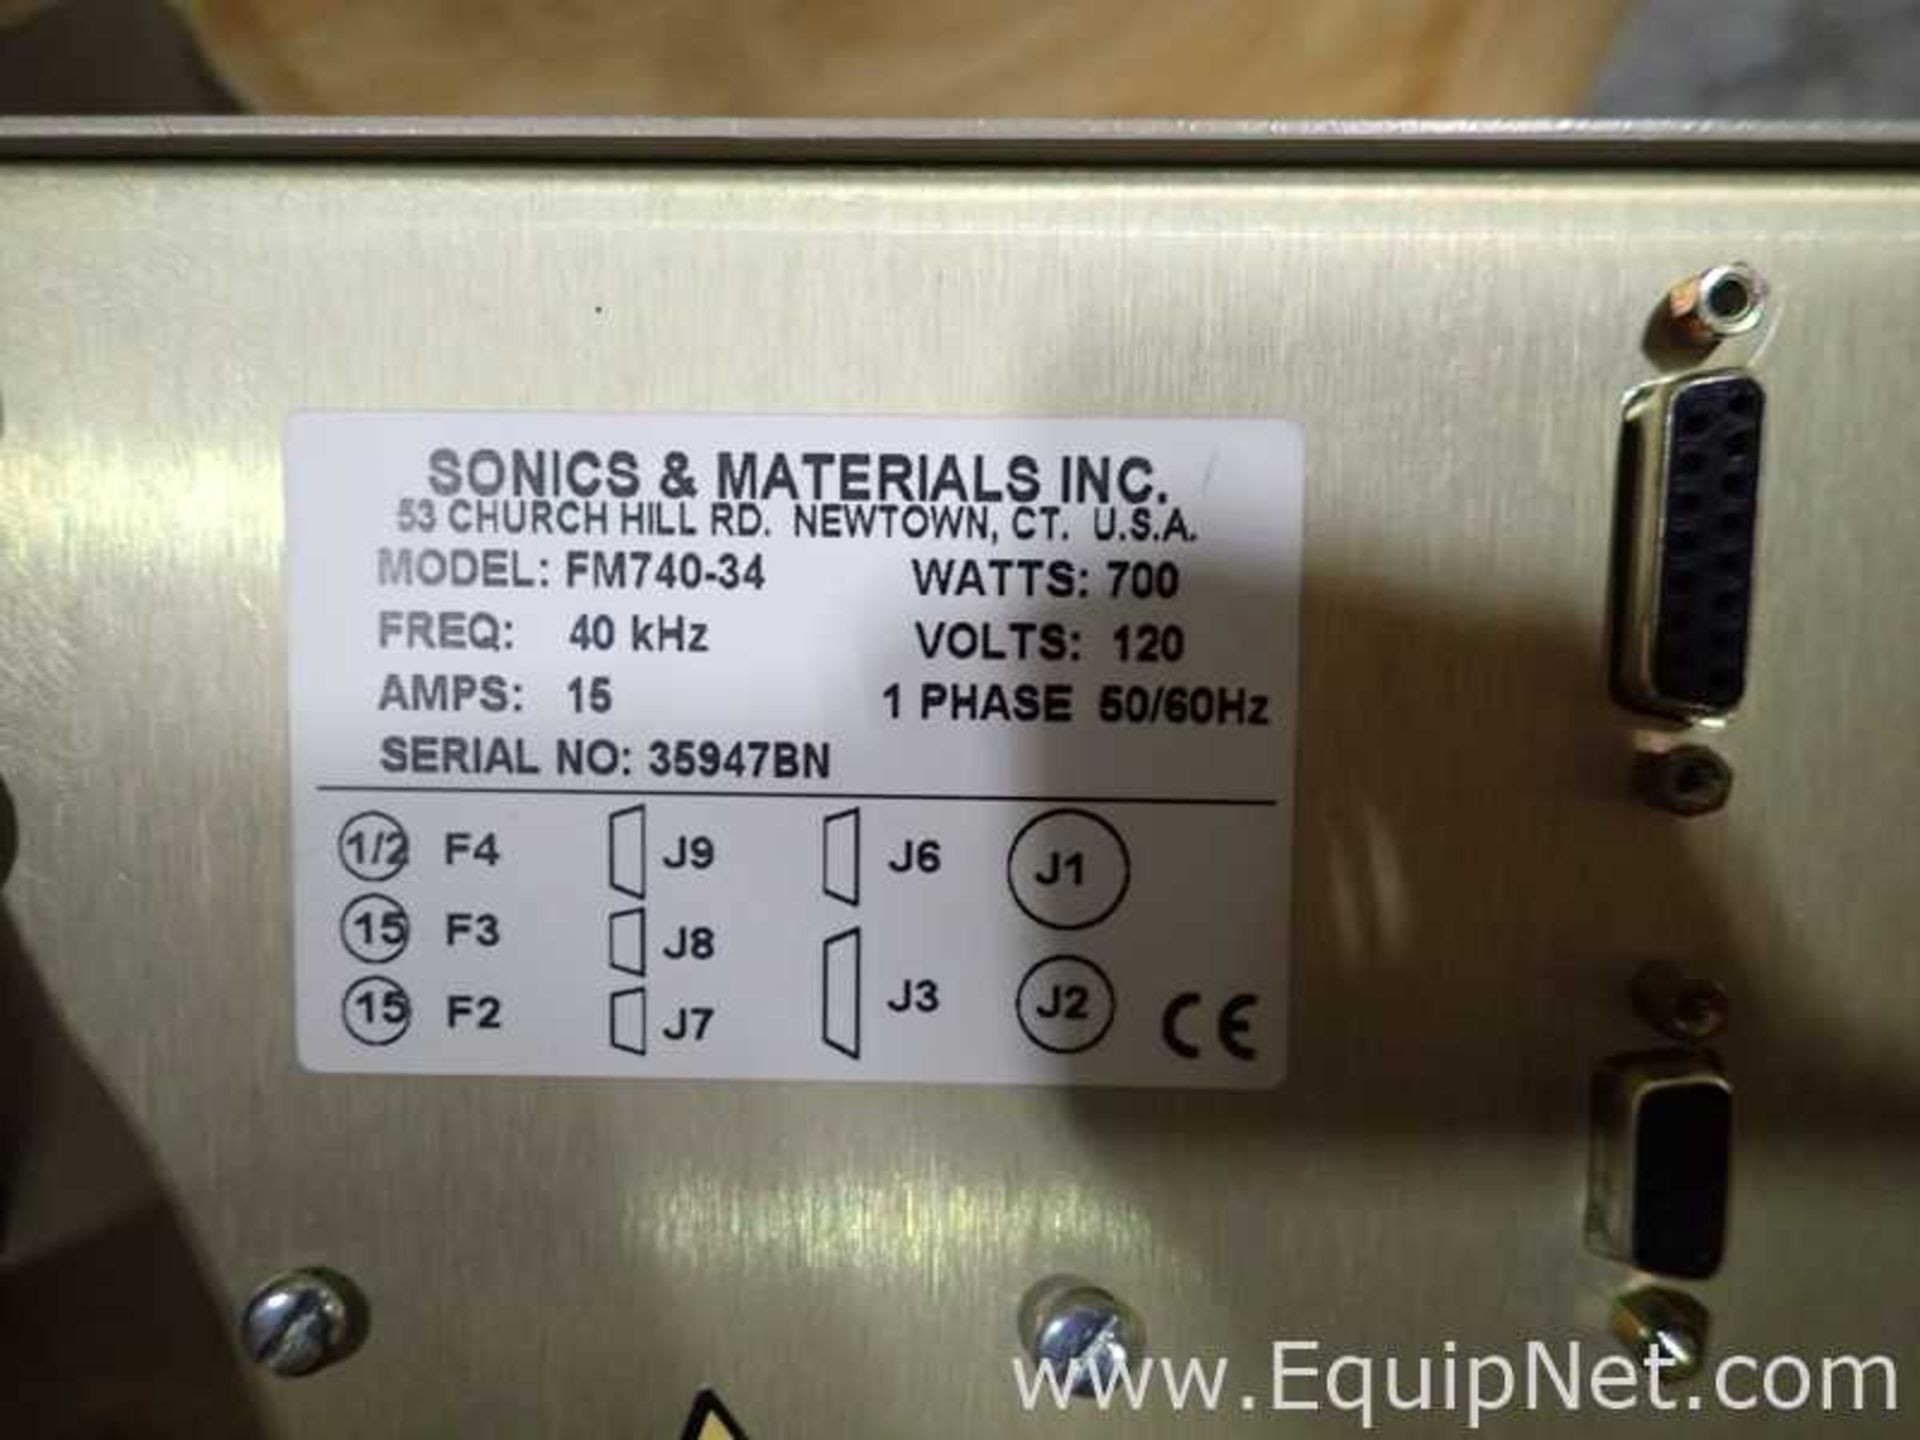 Sonics and Materials 4095 Pneumatic Press with Microsonic Processor for Ultrasonic Plastic Assembly - Image 13 of 13